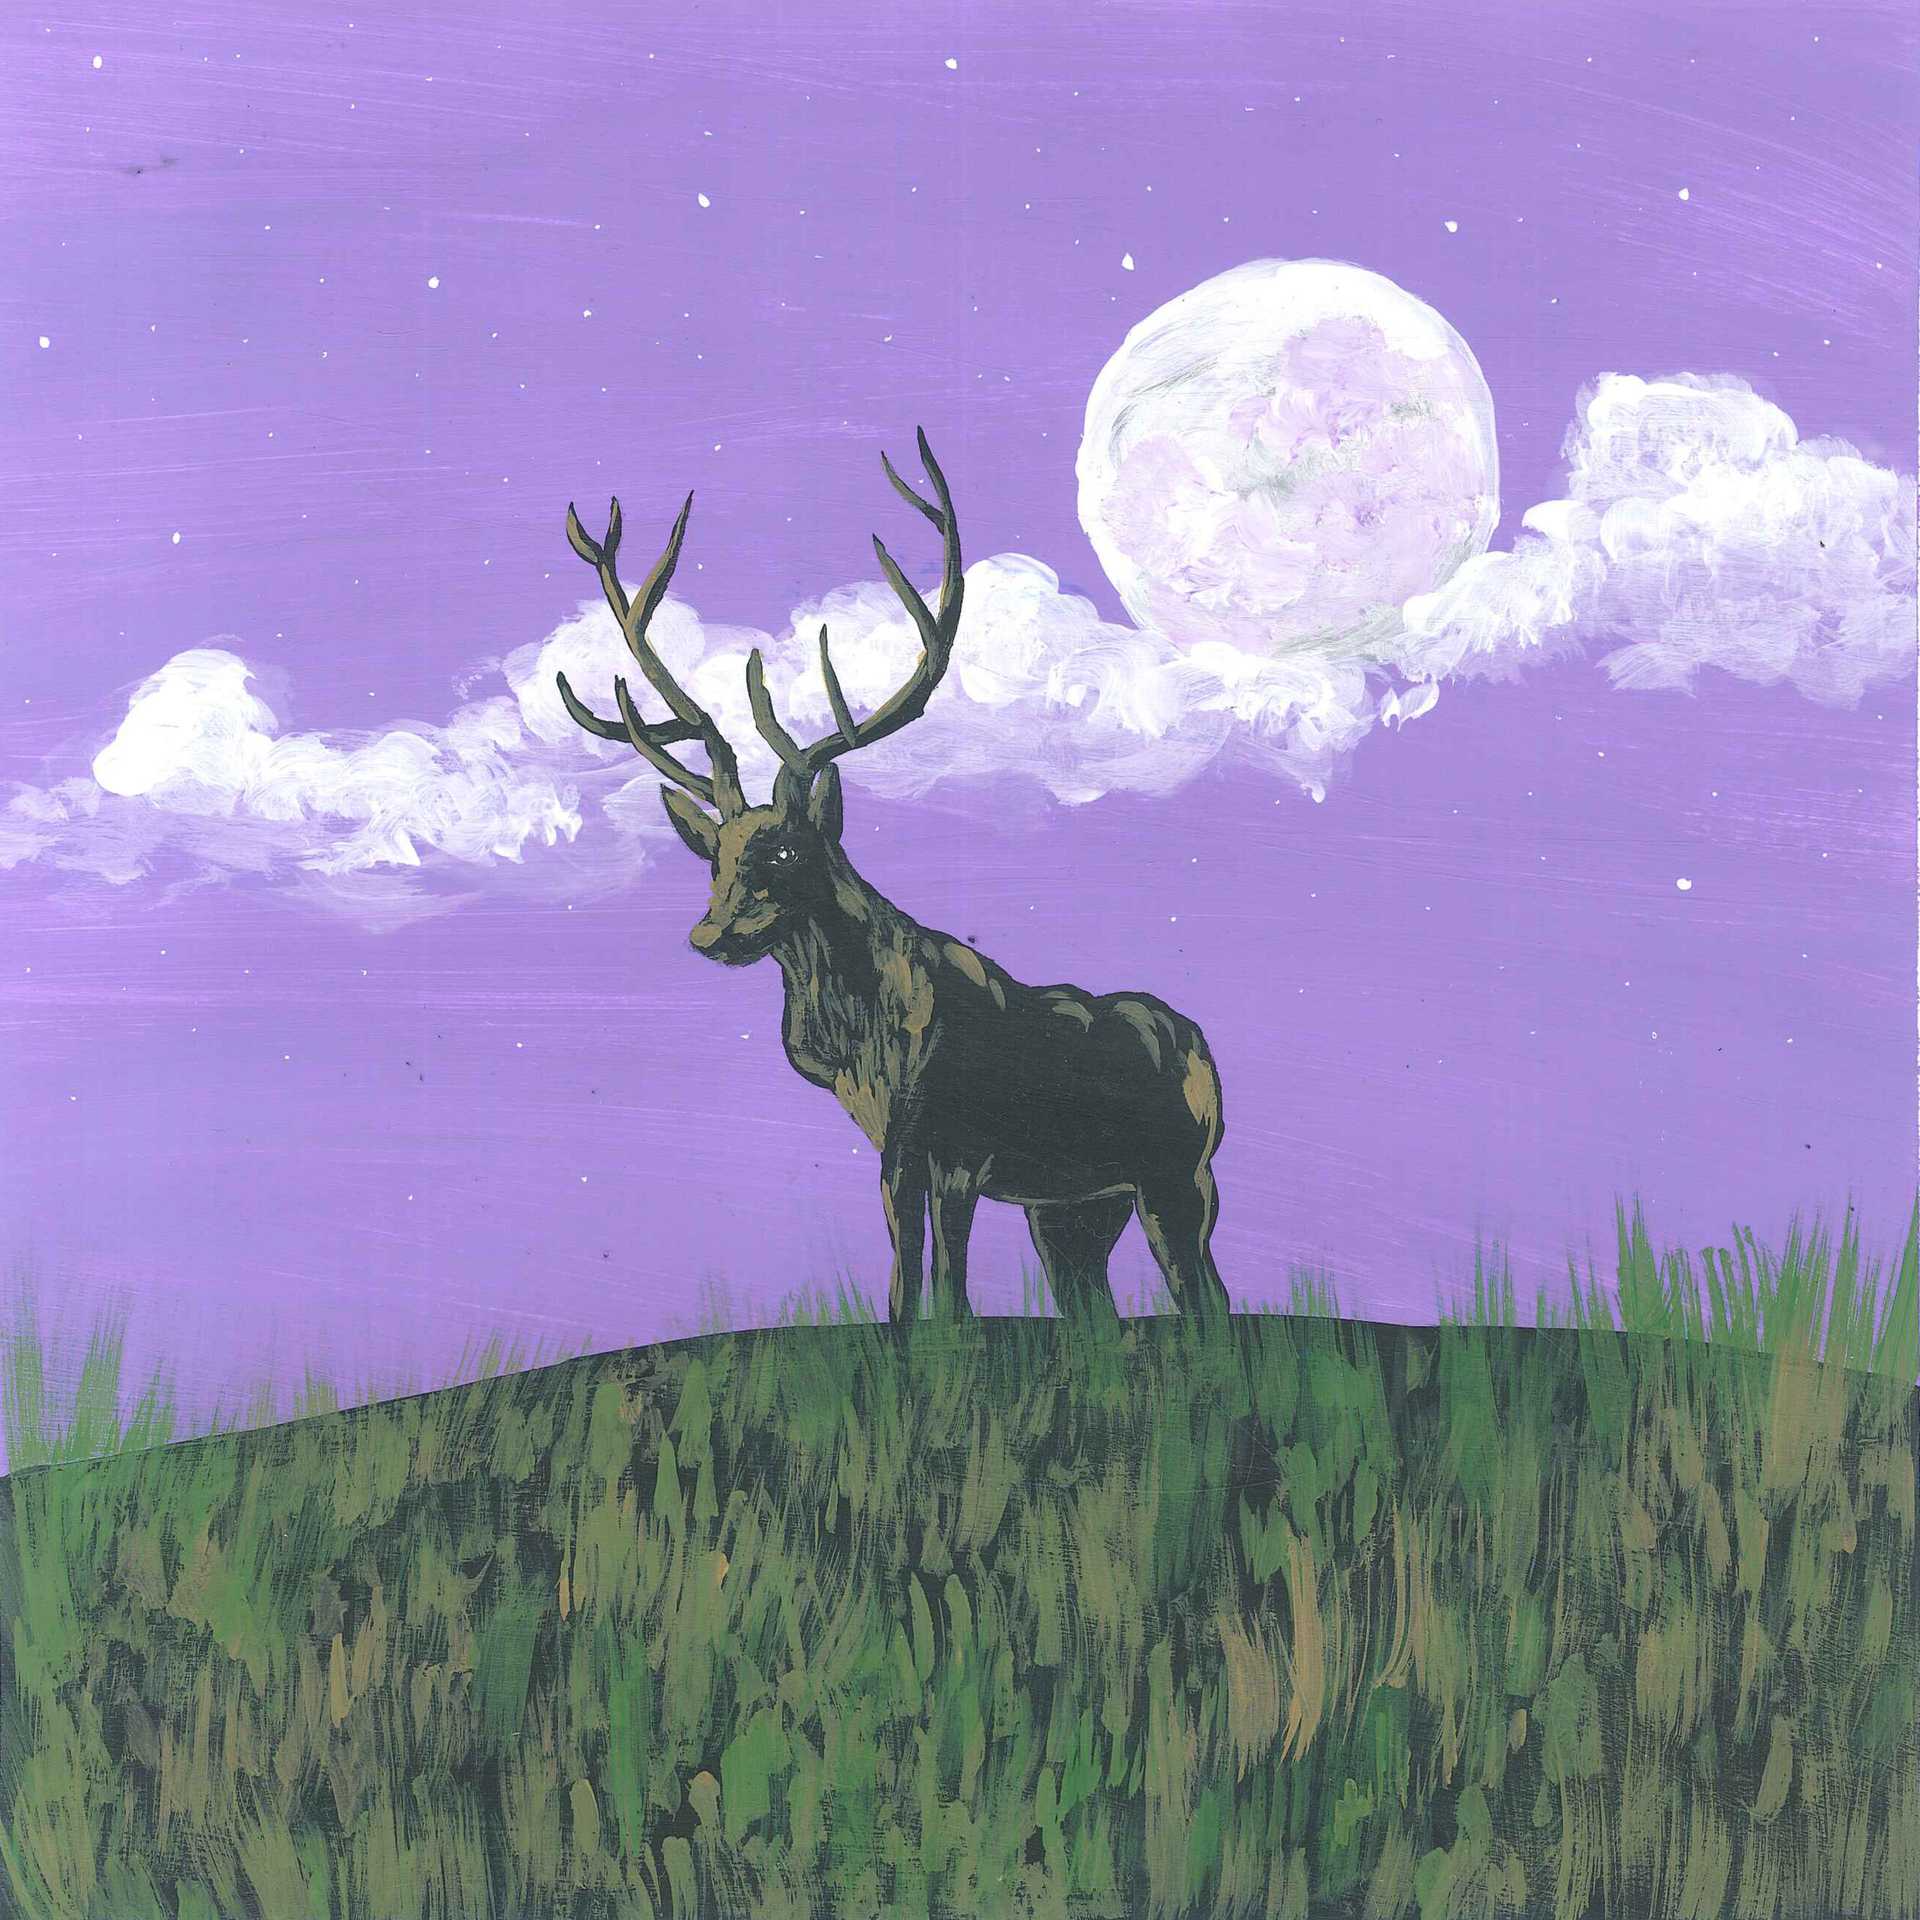 Red Deer on the Field - nature landscape painting - earth.fm